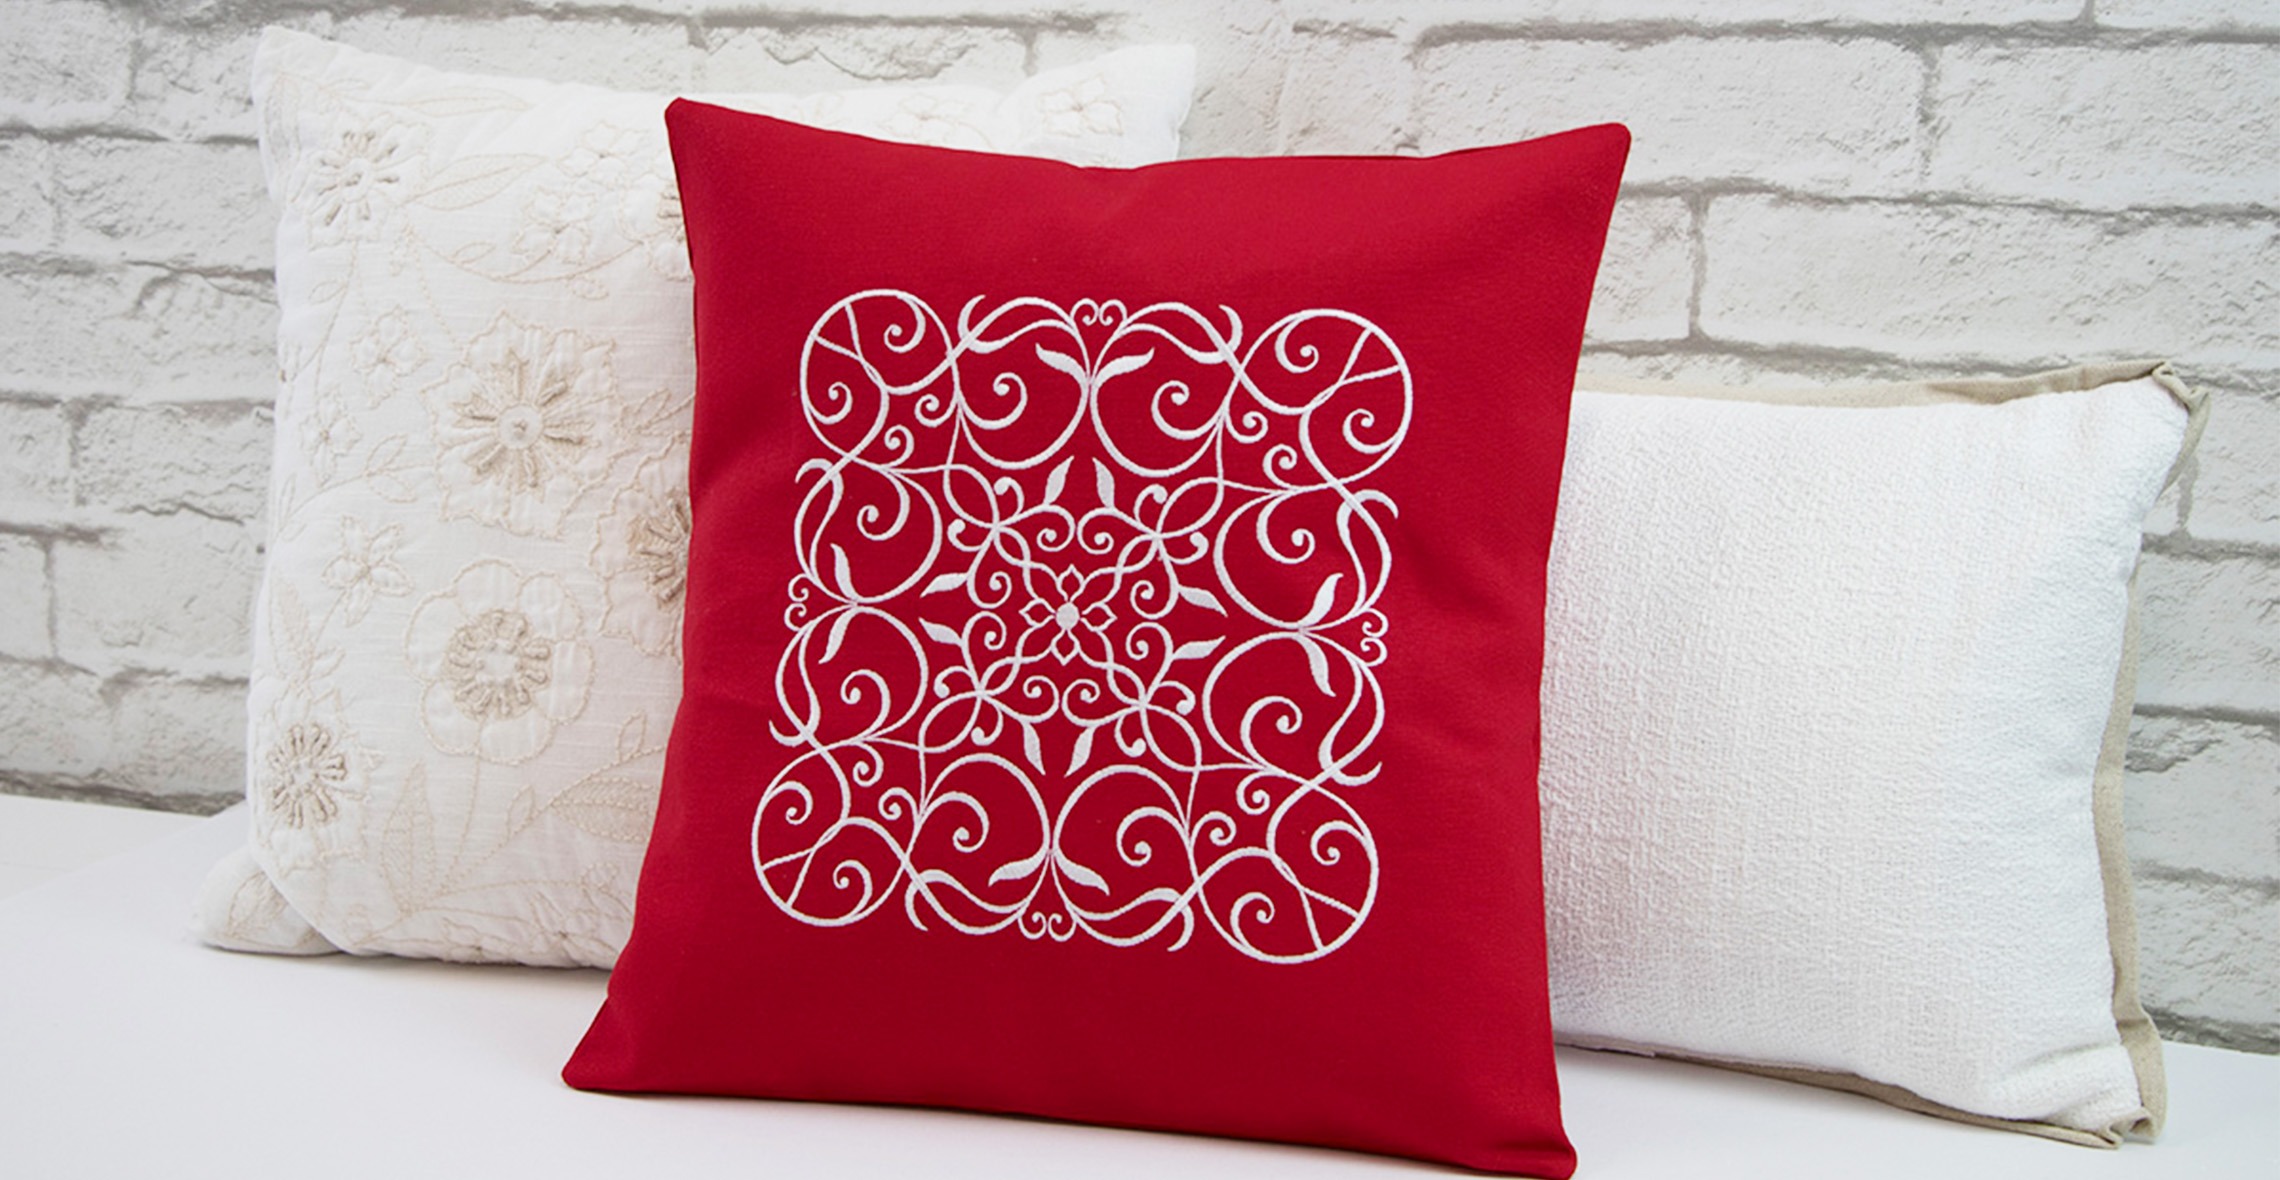 Wrought Iron Embroidered Pillow